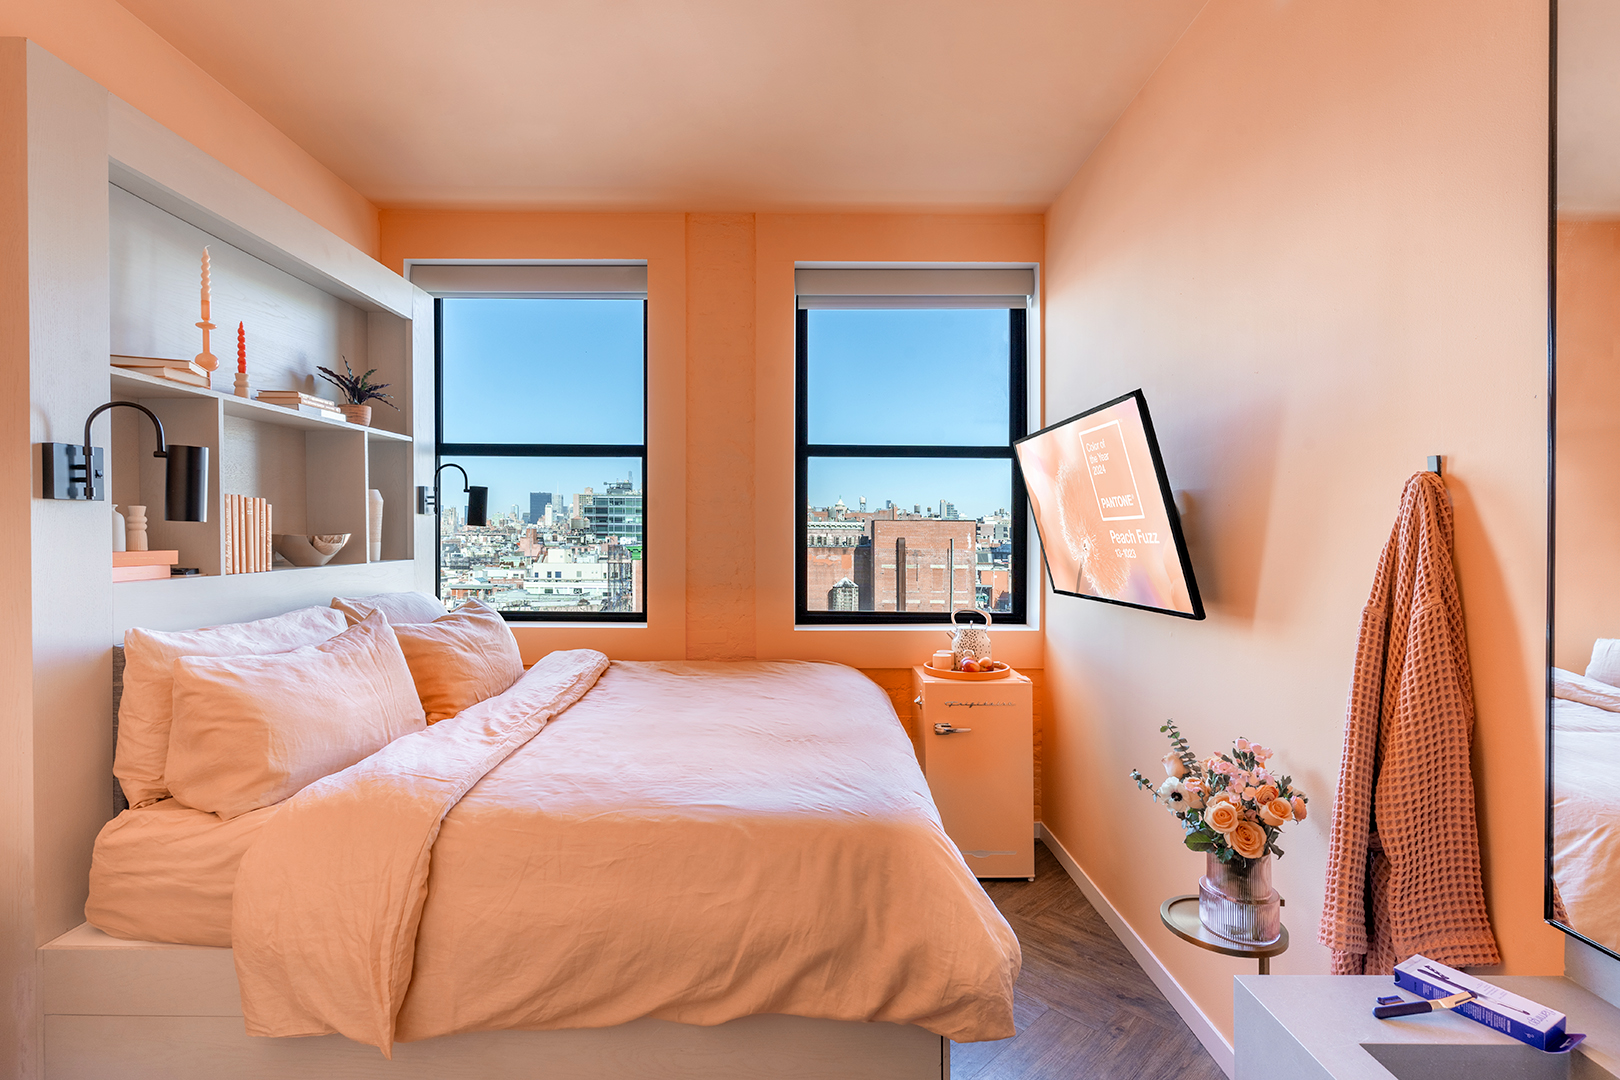 Walker Hotel Room with peach walls, bedding and fridge